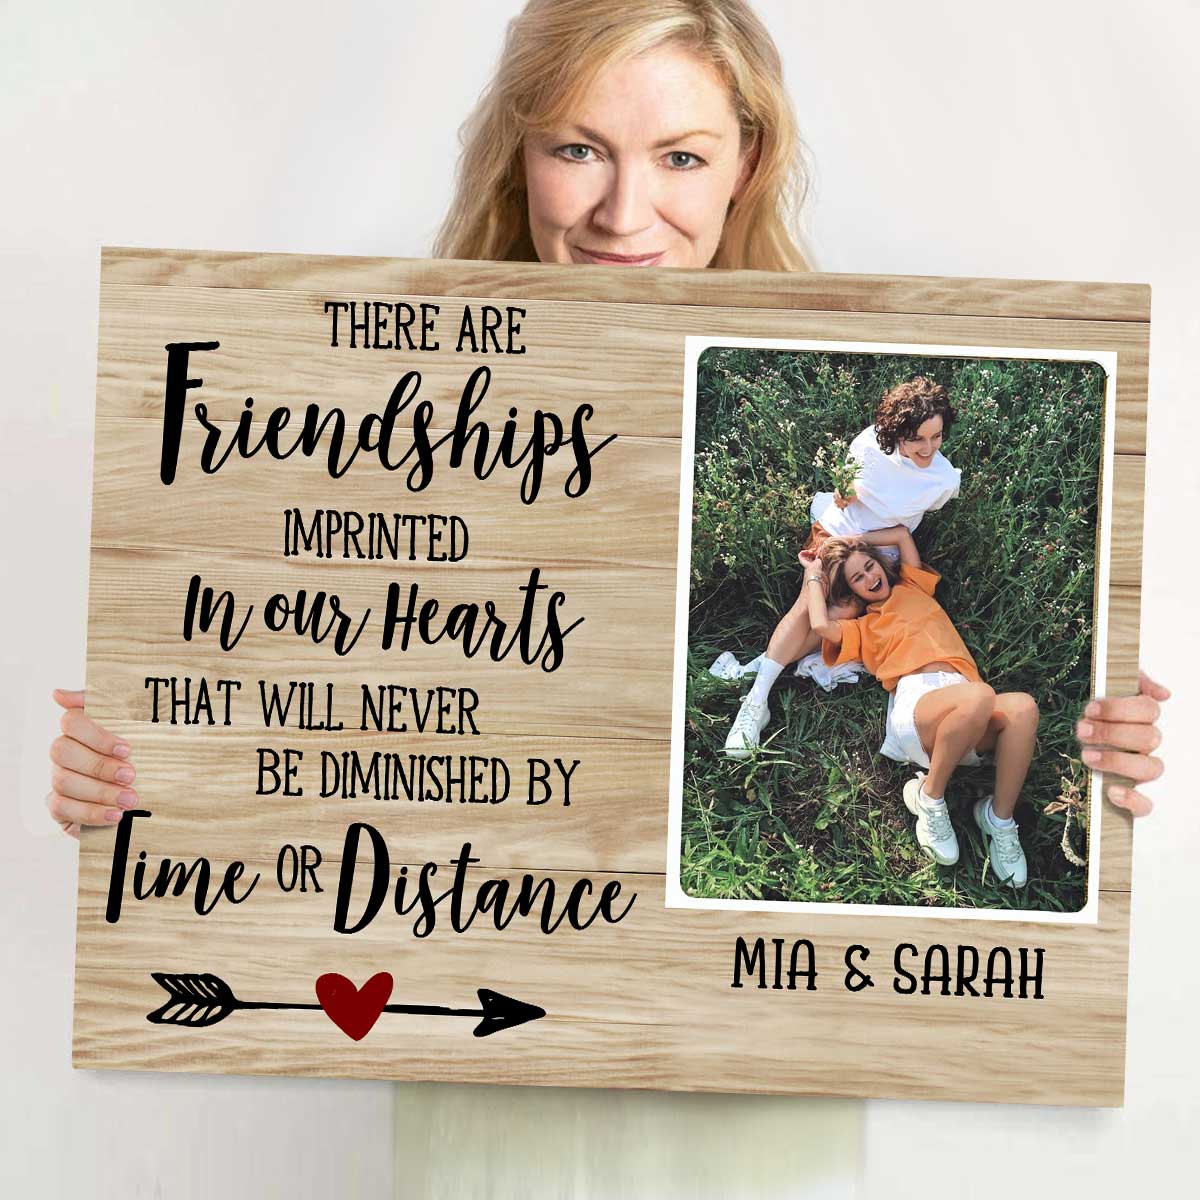 Best Friends Forever Never Apart Personalized Picture Frame, Go Away Friend  Leaving Gift, Long Distance Miss You Bestie, BFF Photo Included 